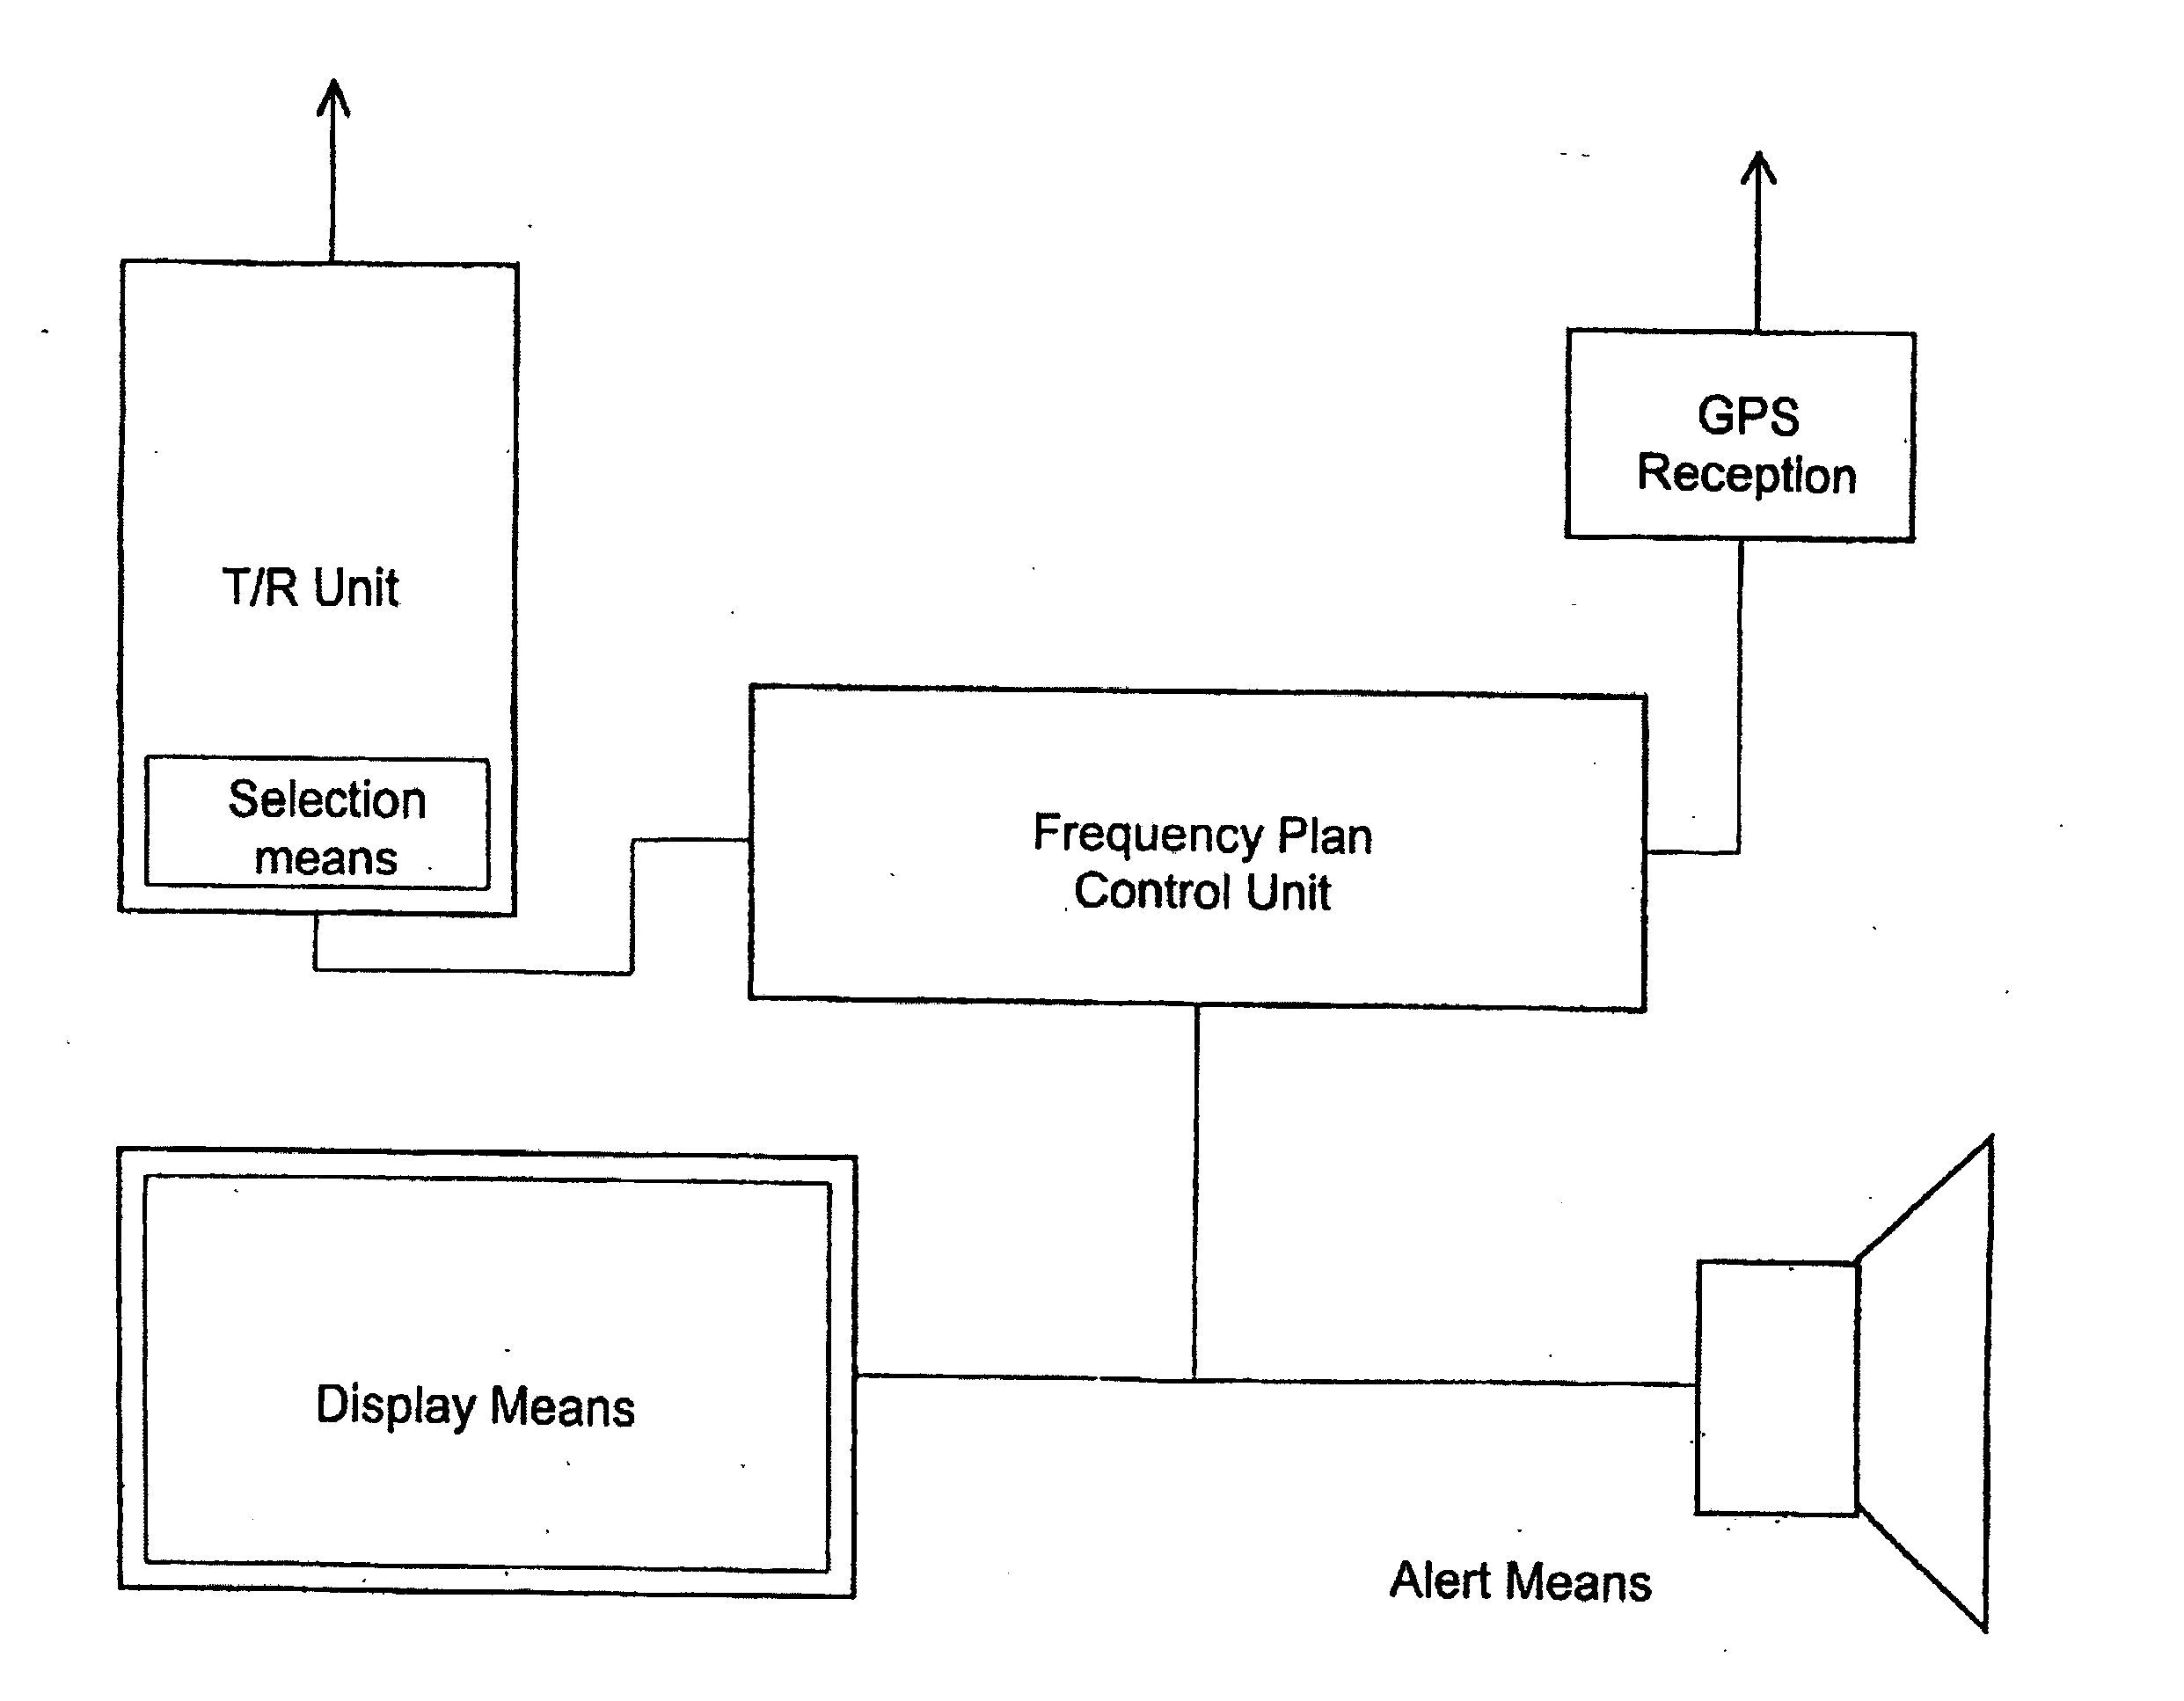 Frequency allocation in a radio system